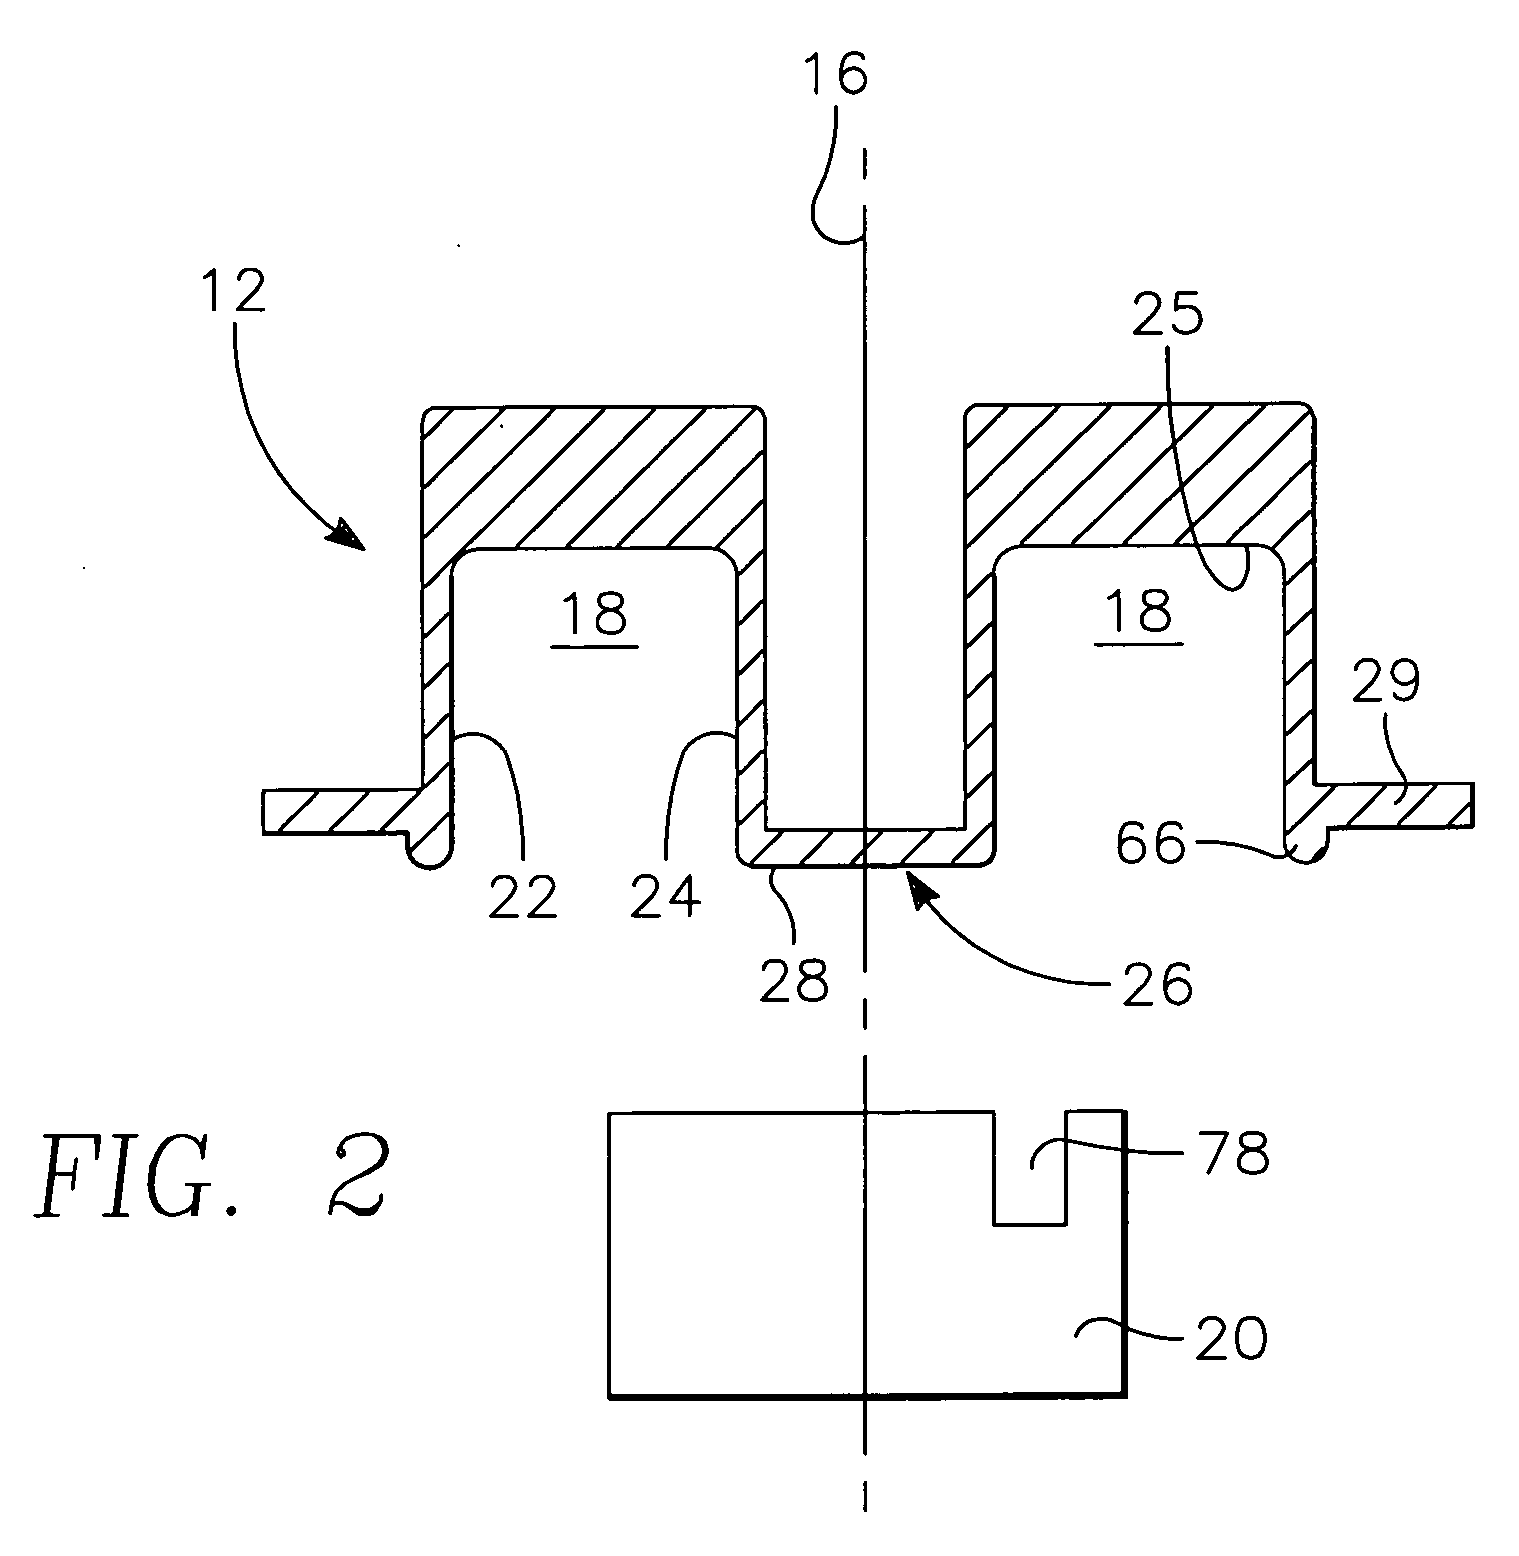 Controlled multi-step magnetron sputtering process